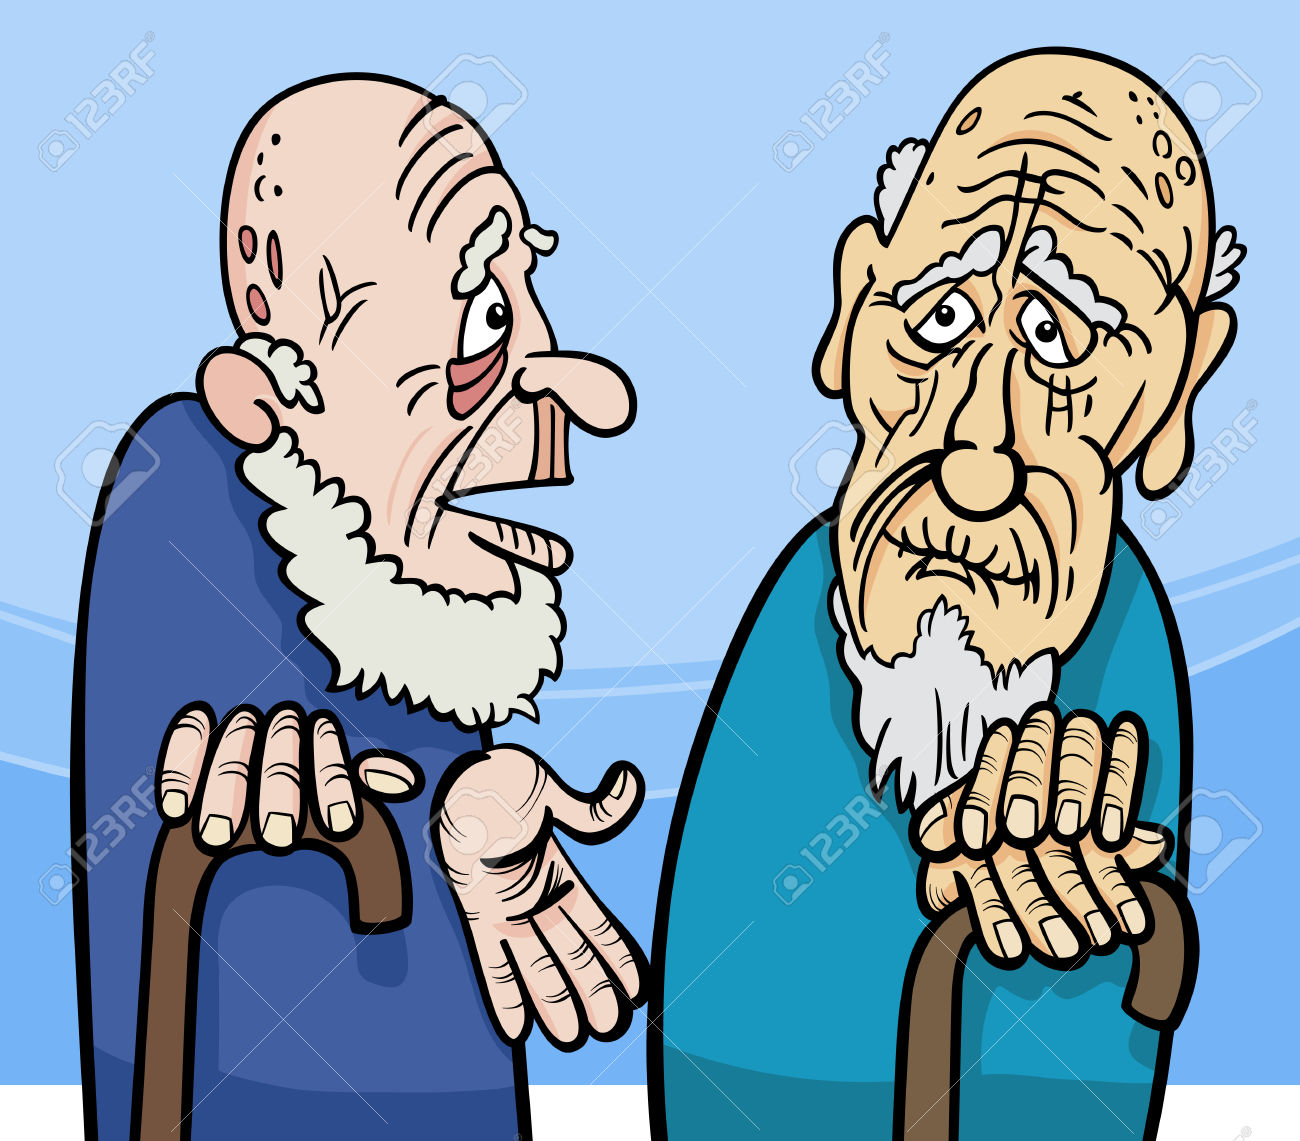 Old man speaking clipart.